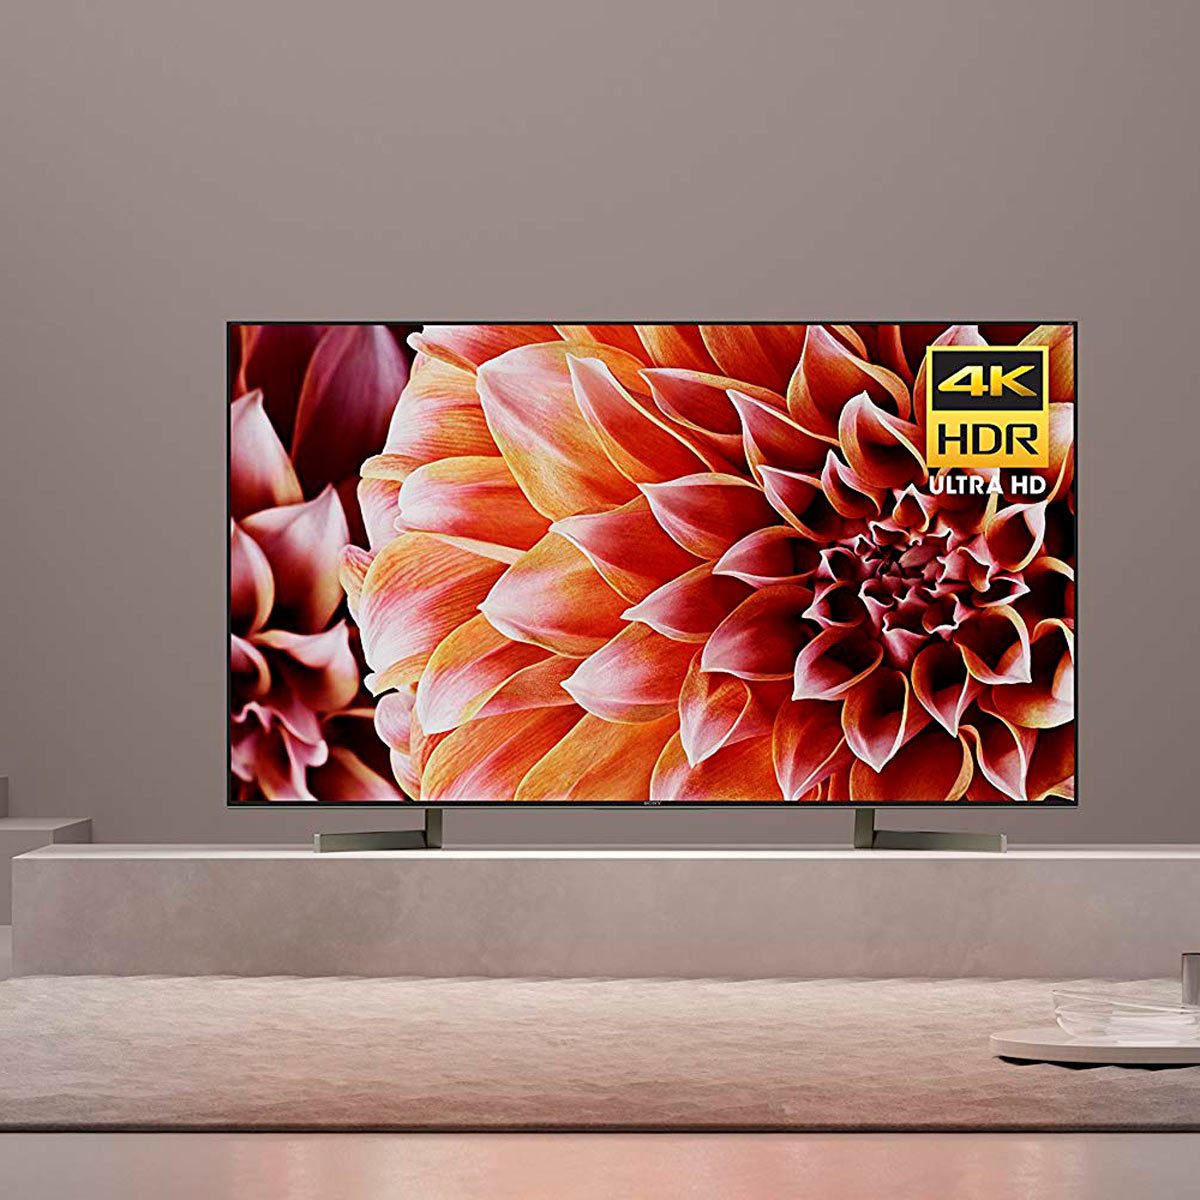 The Best TV Buying Guide for Your Home | Famliy Handyman